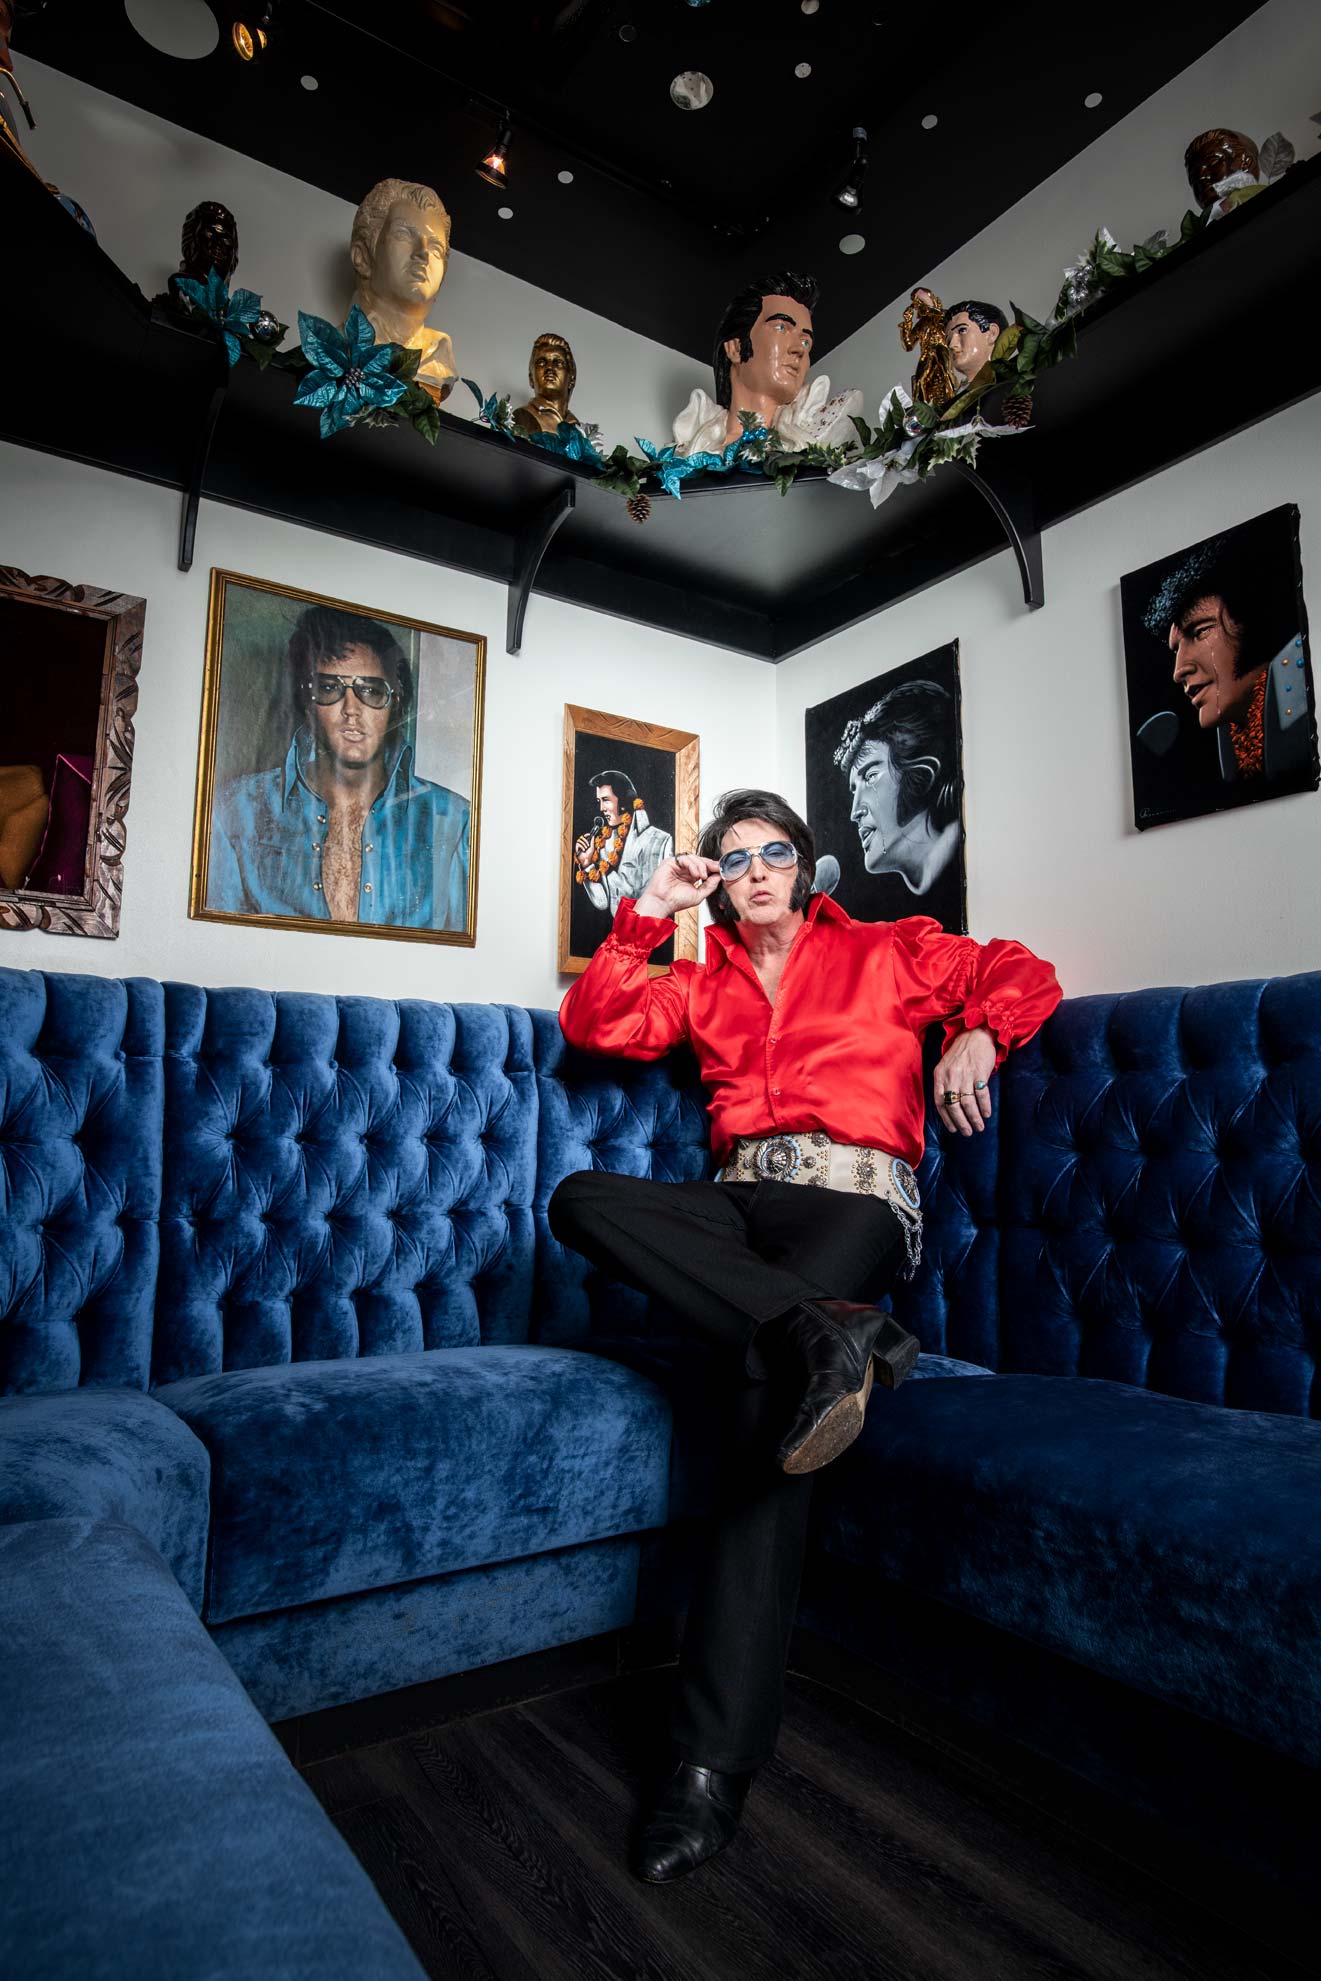 Elvis impersonator Jed Duvall wearing a red top and seated on a blue couch